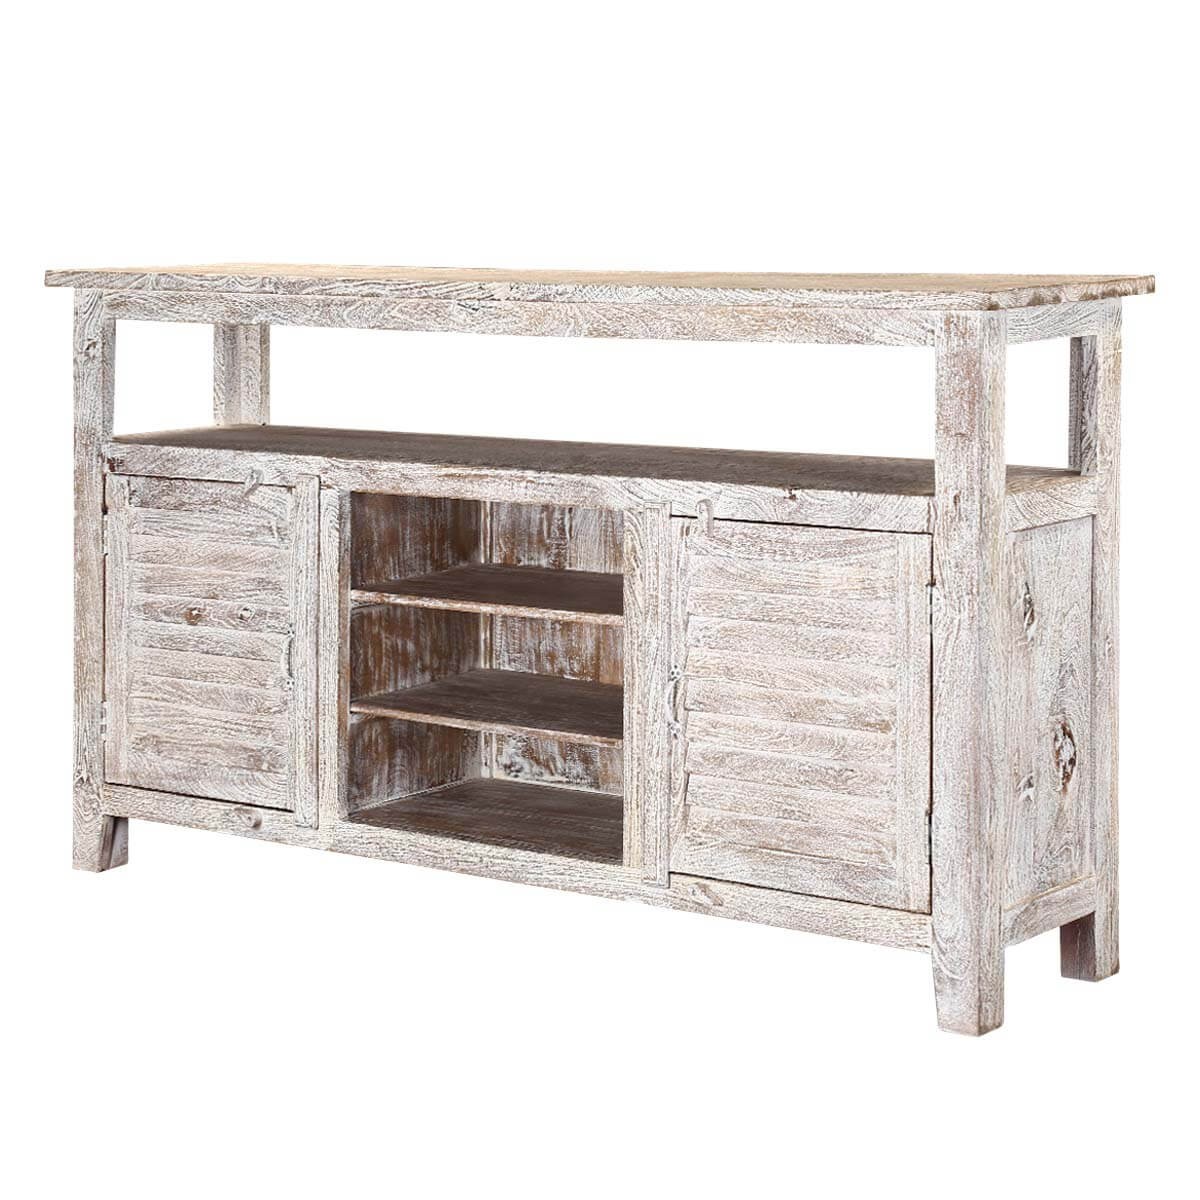 Mifflin distressed mango wood handcrafted rustic buffet table